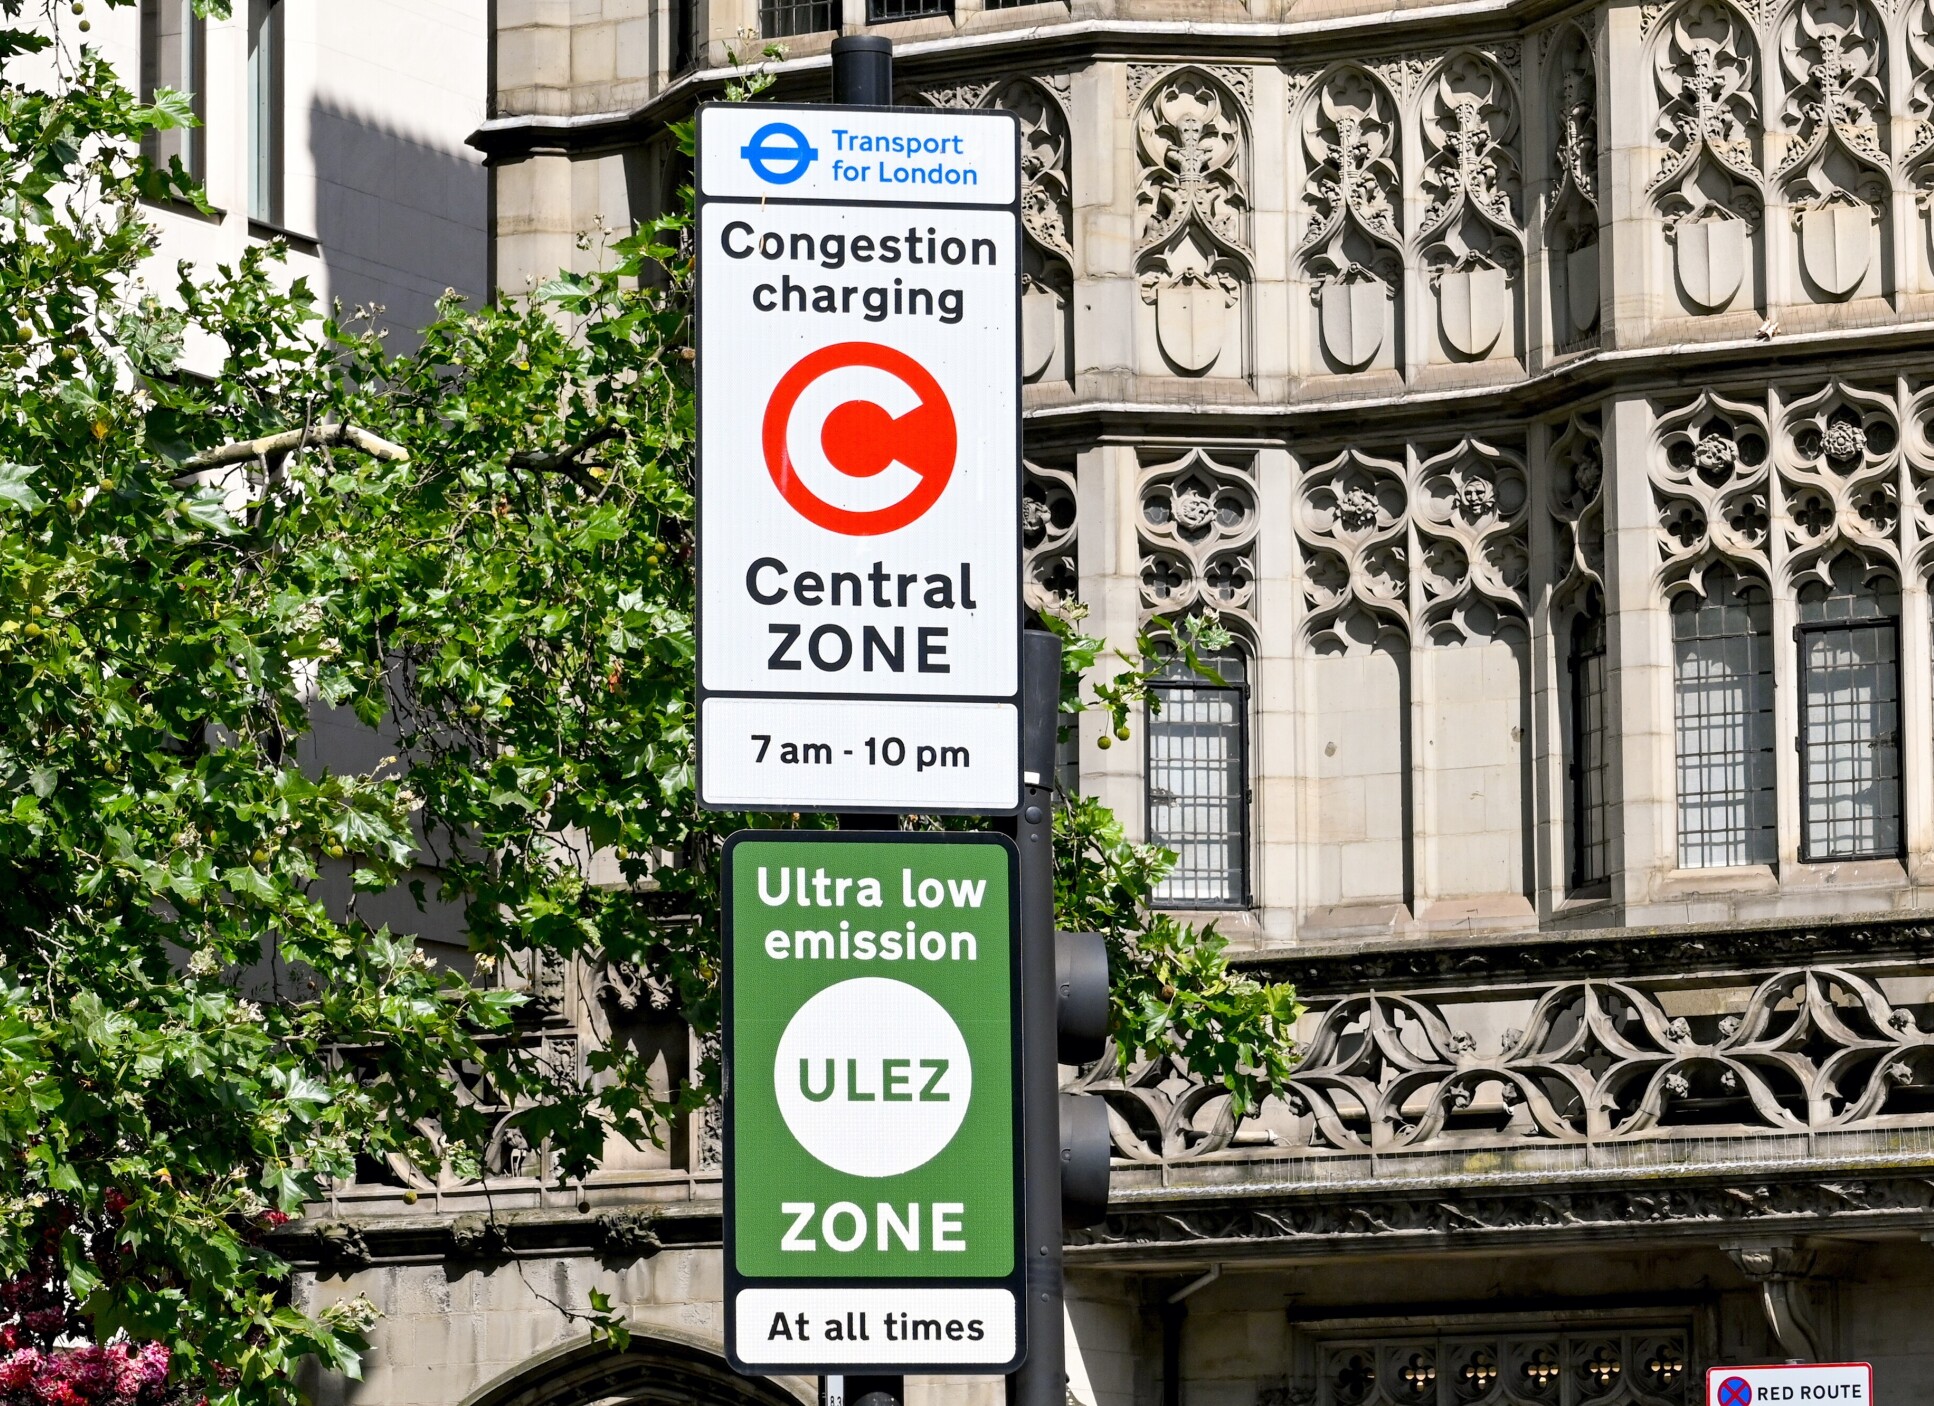 Low emission and congestion charge zones